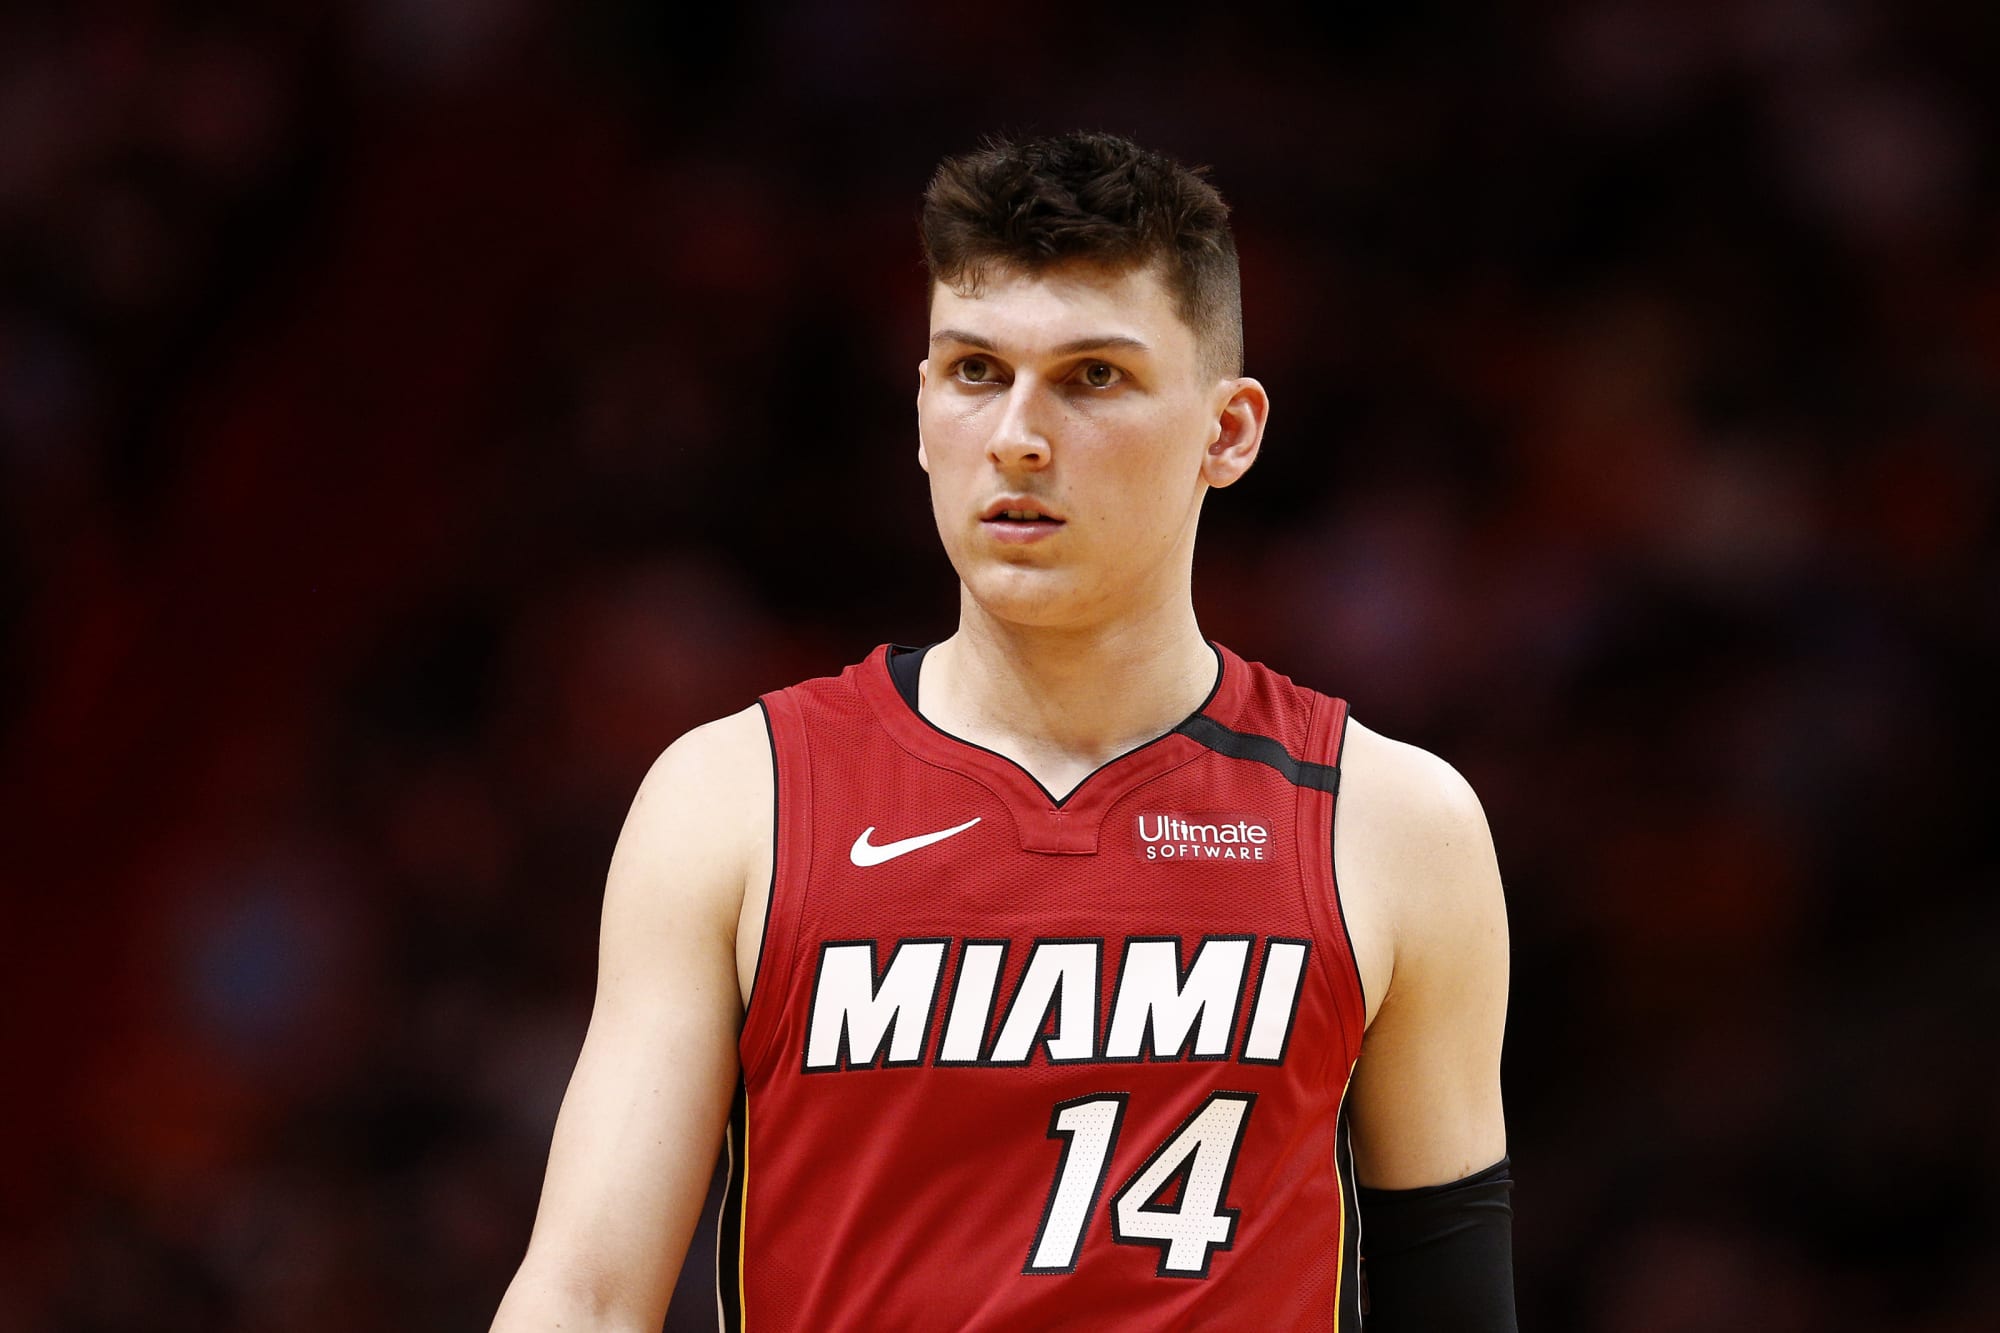 Tyler Herro The Miami Heat's newest star is not afraid of the moment